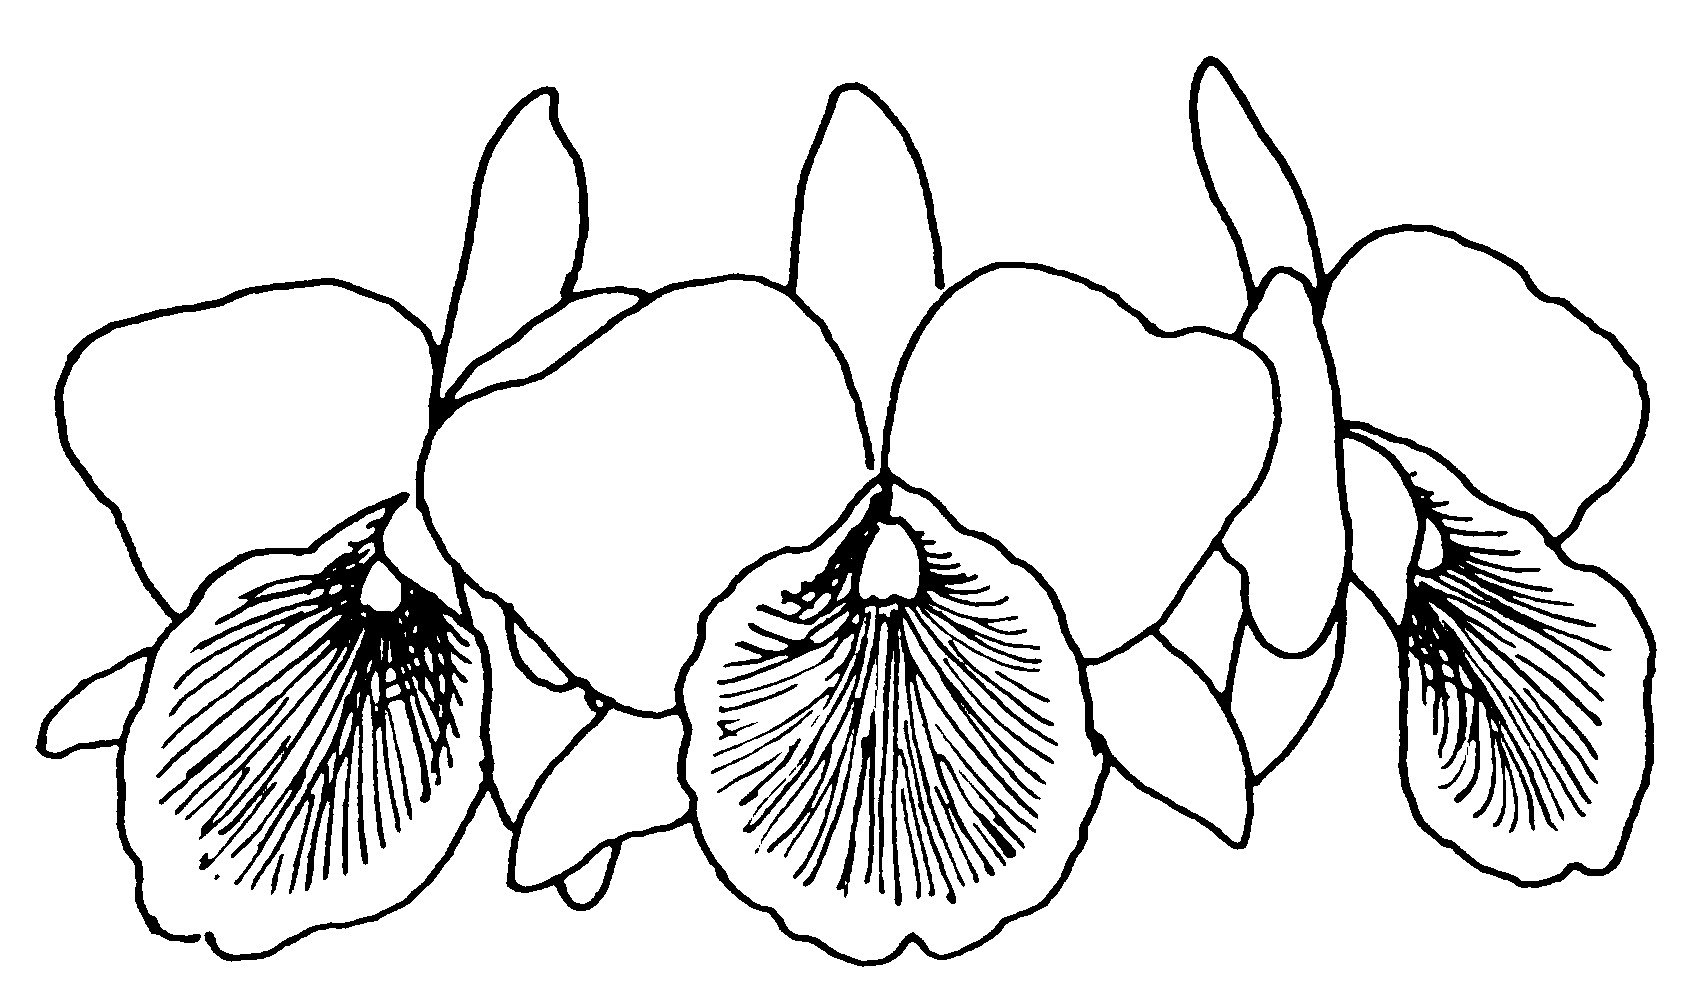 Orchid Drawing Outline at GetDrawings.com | Free for ...